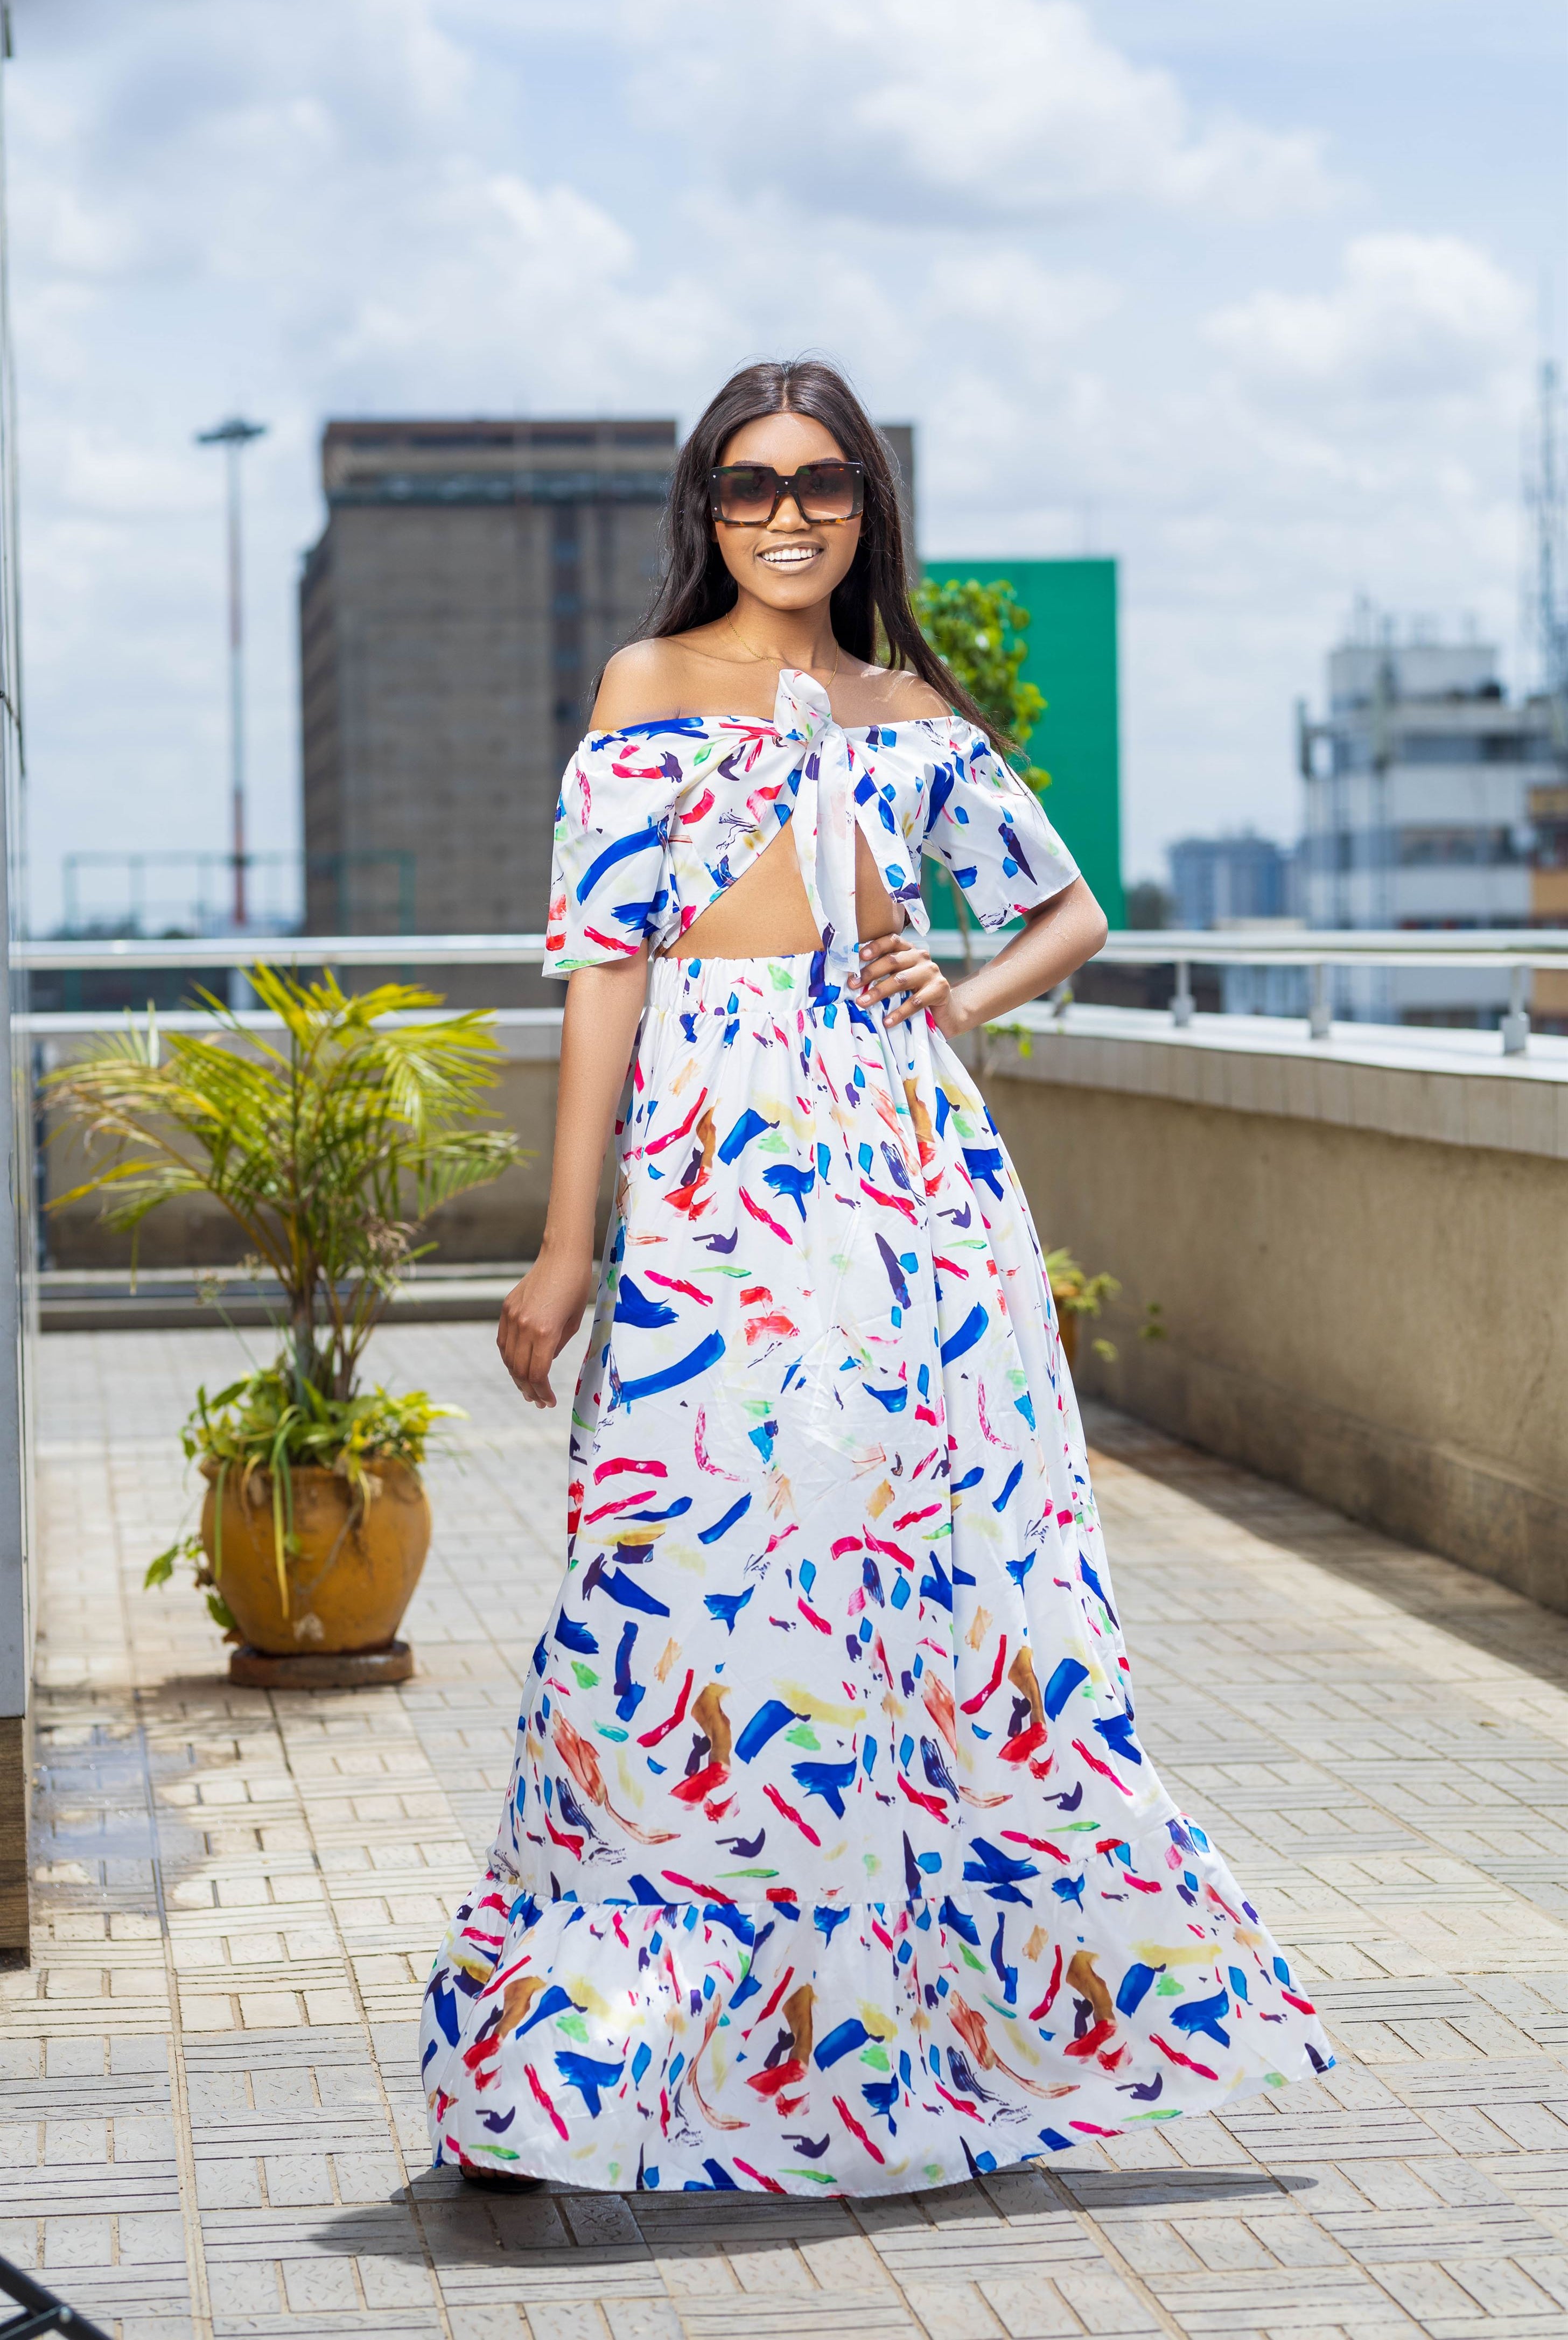 Whispers in the Wind Set - Shop Kenya - Affordable Fashion Whispers in the Wind Set hiiii_style 2 Piece Set fiona-2pc-wrap-skirt-combo beach, that_coast_look Shop Kenya - Affordable Fashion